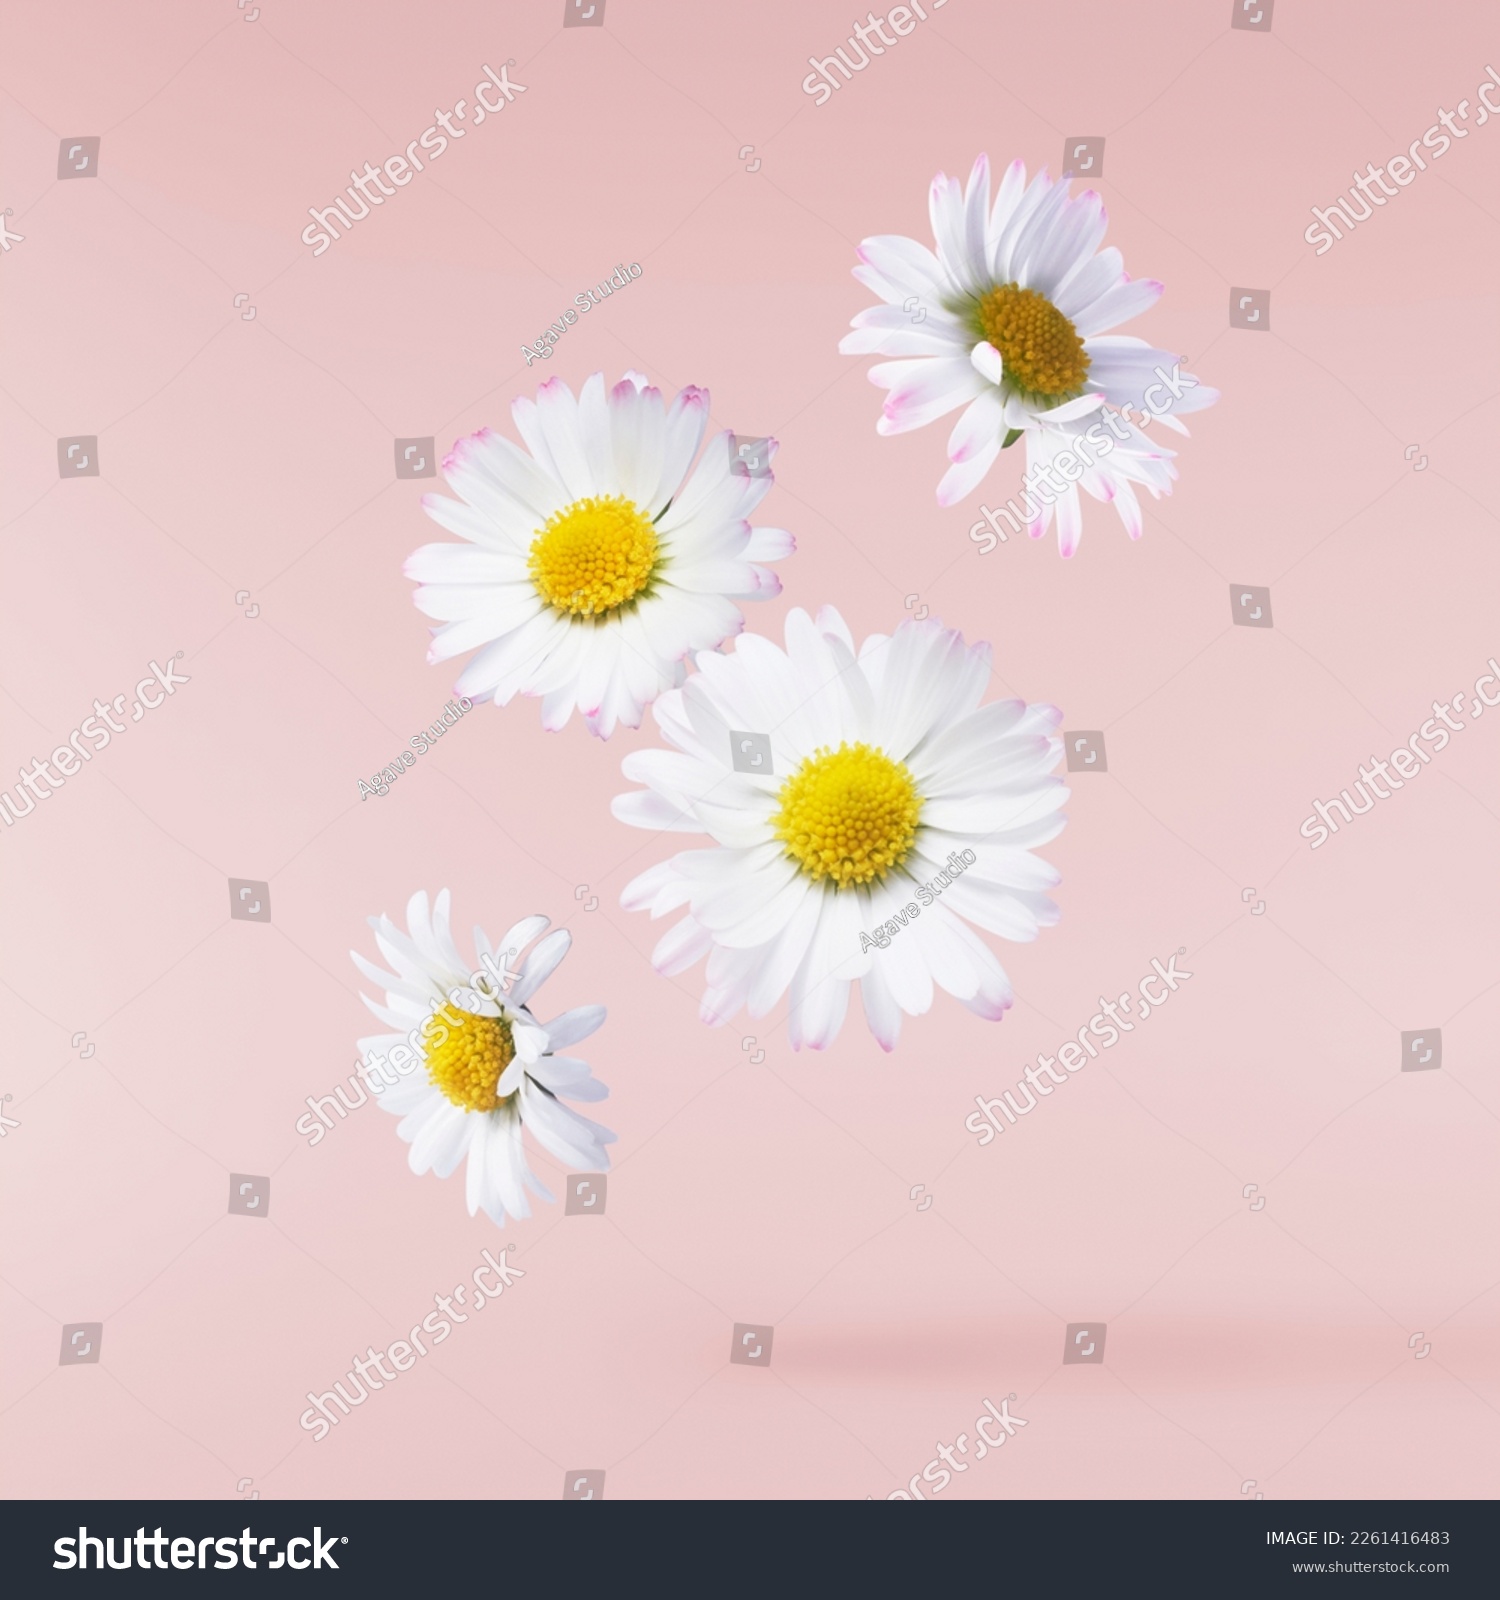 A beautiful white daisy or chamomile flower falling in the air isolated on pastel pink background. Medicine, healthcare or cosmetics levitation or zero gravity concepthion. High resolution image. #2261416483